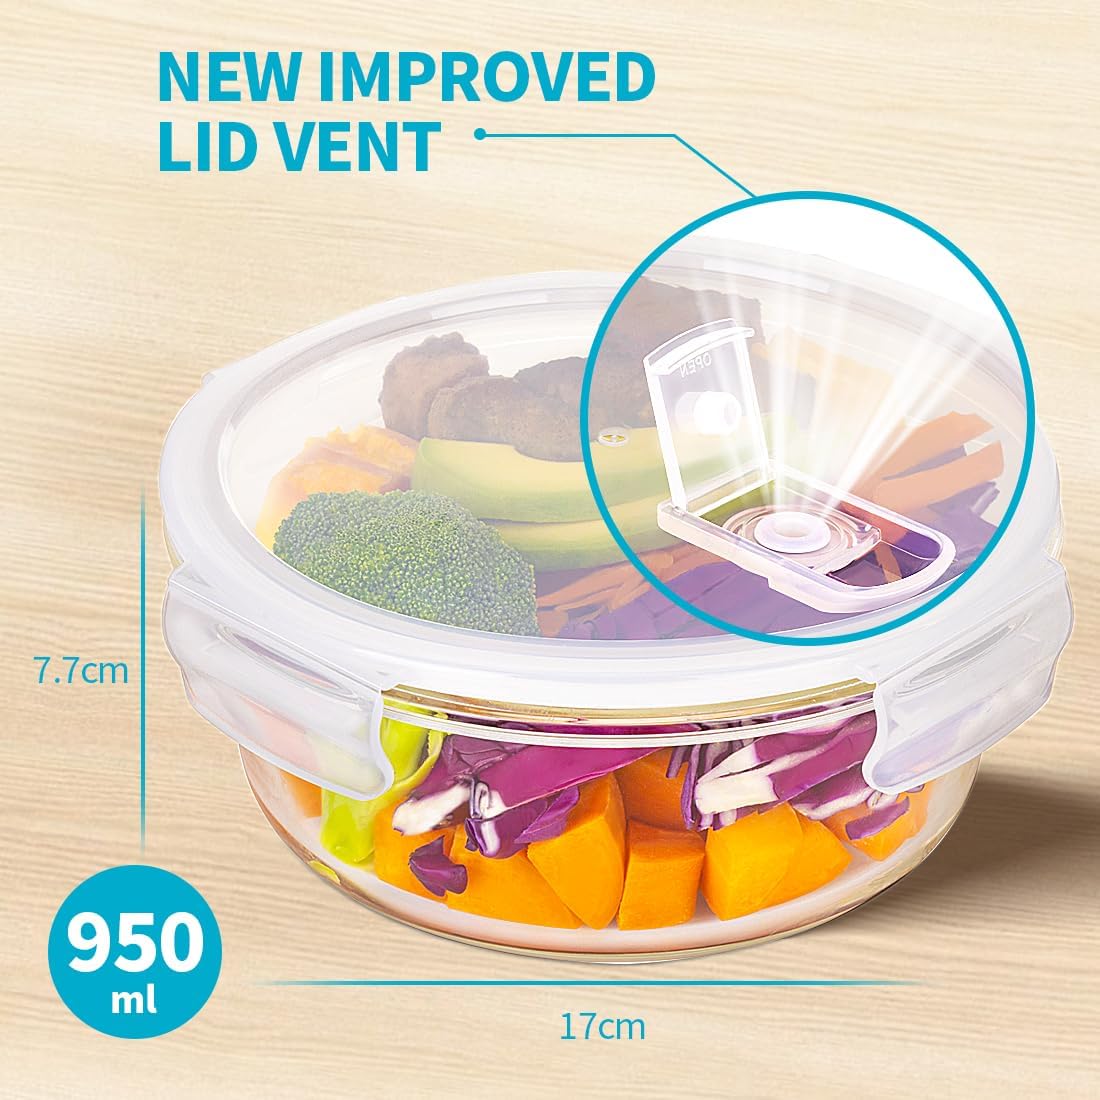 Igluu Meal Prep Glass Containers [5 PACK + EXTRA lid] - Glass Food